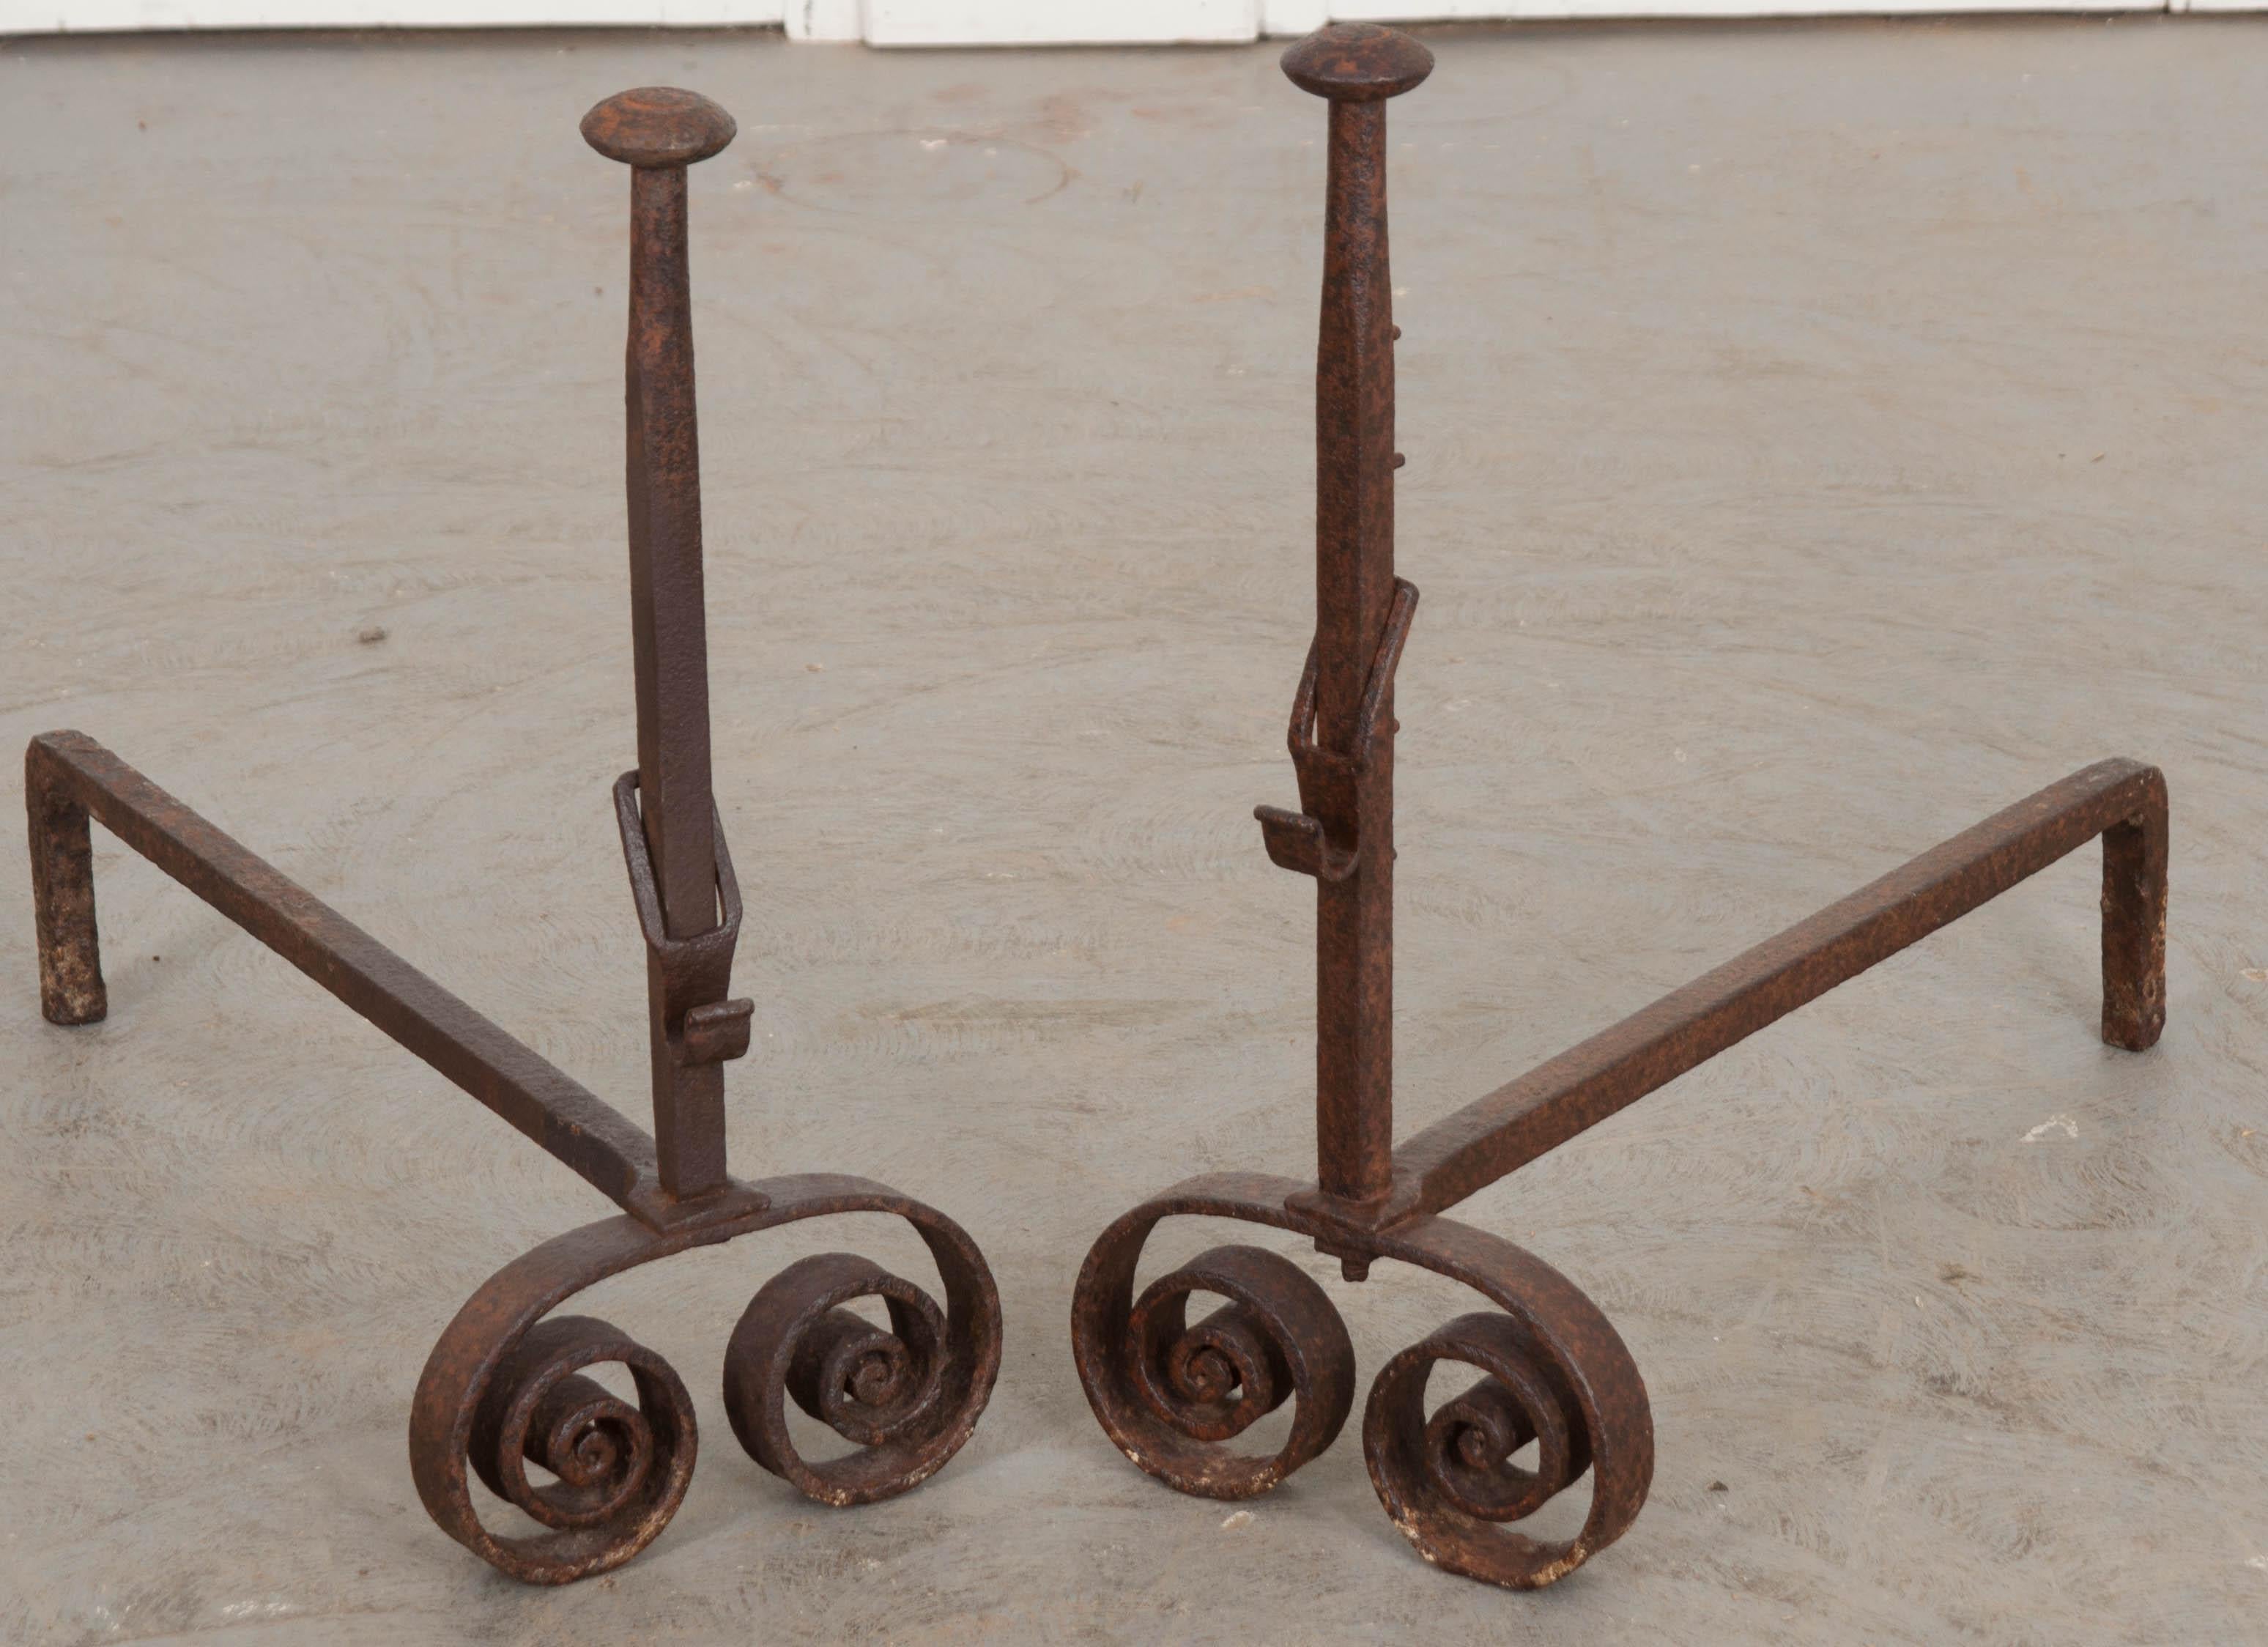 This fine and heavy pair of columnar iron andirons, circa 1850s, was forged in France. Each guard is outfitted with a hook and five ratcheting attachments for hanging pots or spits at varying levels. The iron has taken on a lovely patina thanks to